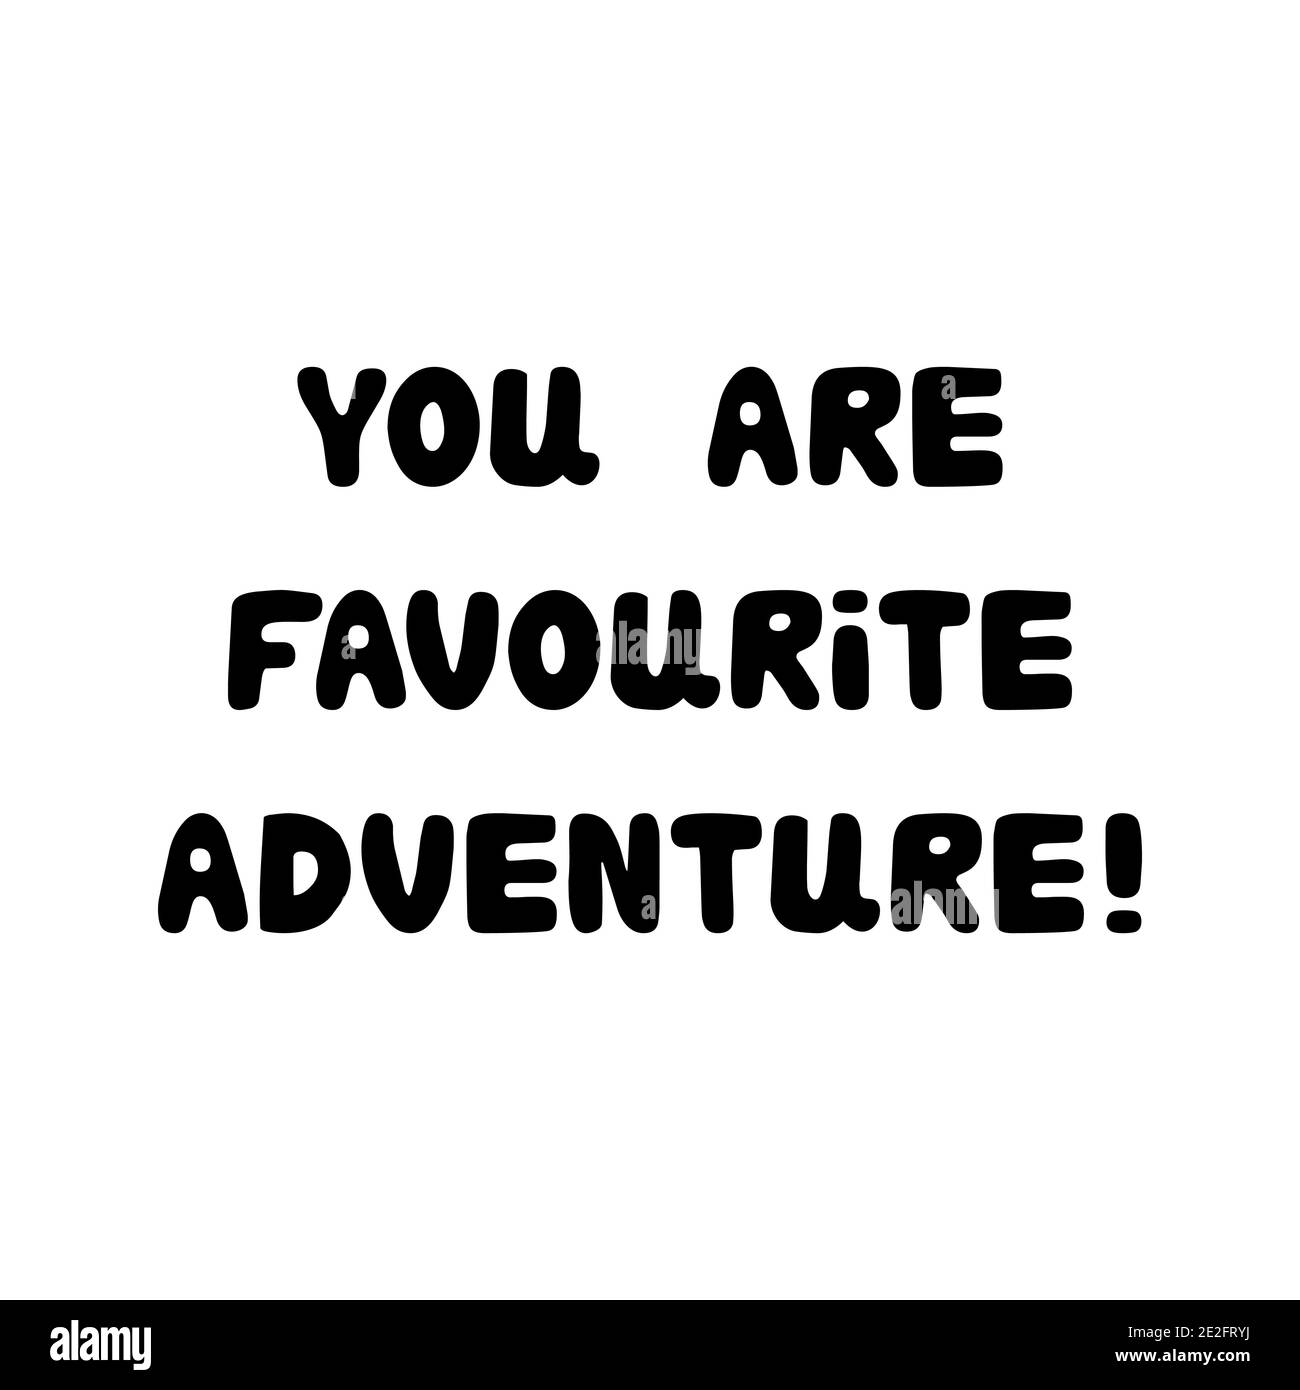 You are favourite adventure. Handwritten roundish lettering isolated on a white background. Stock Vector